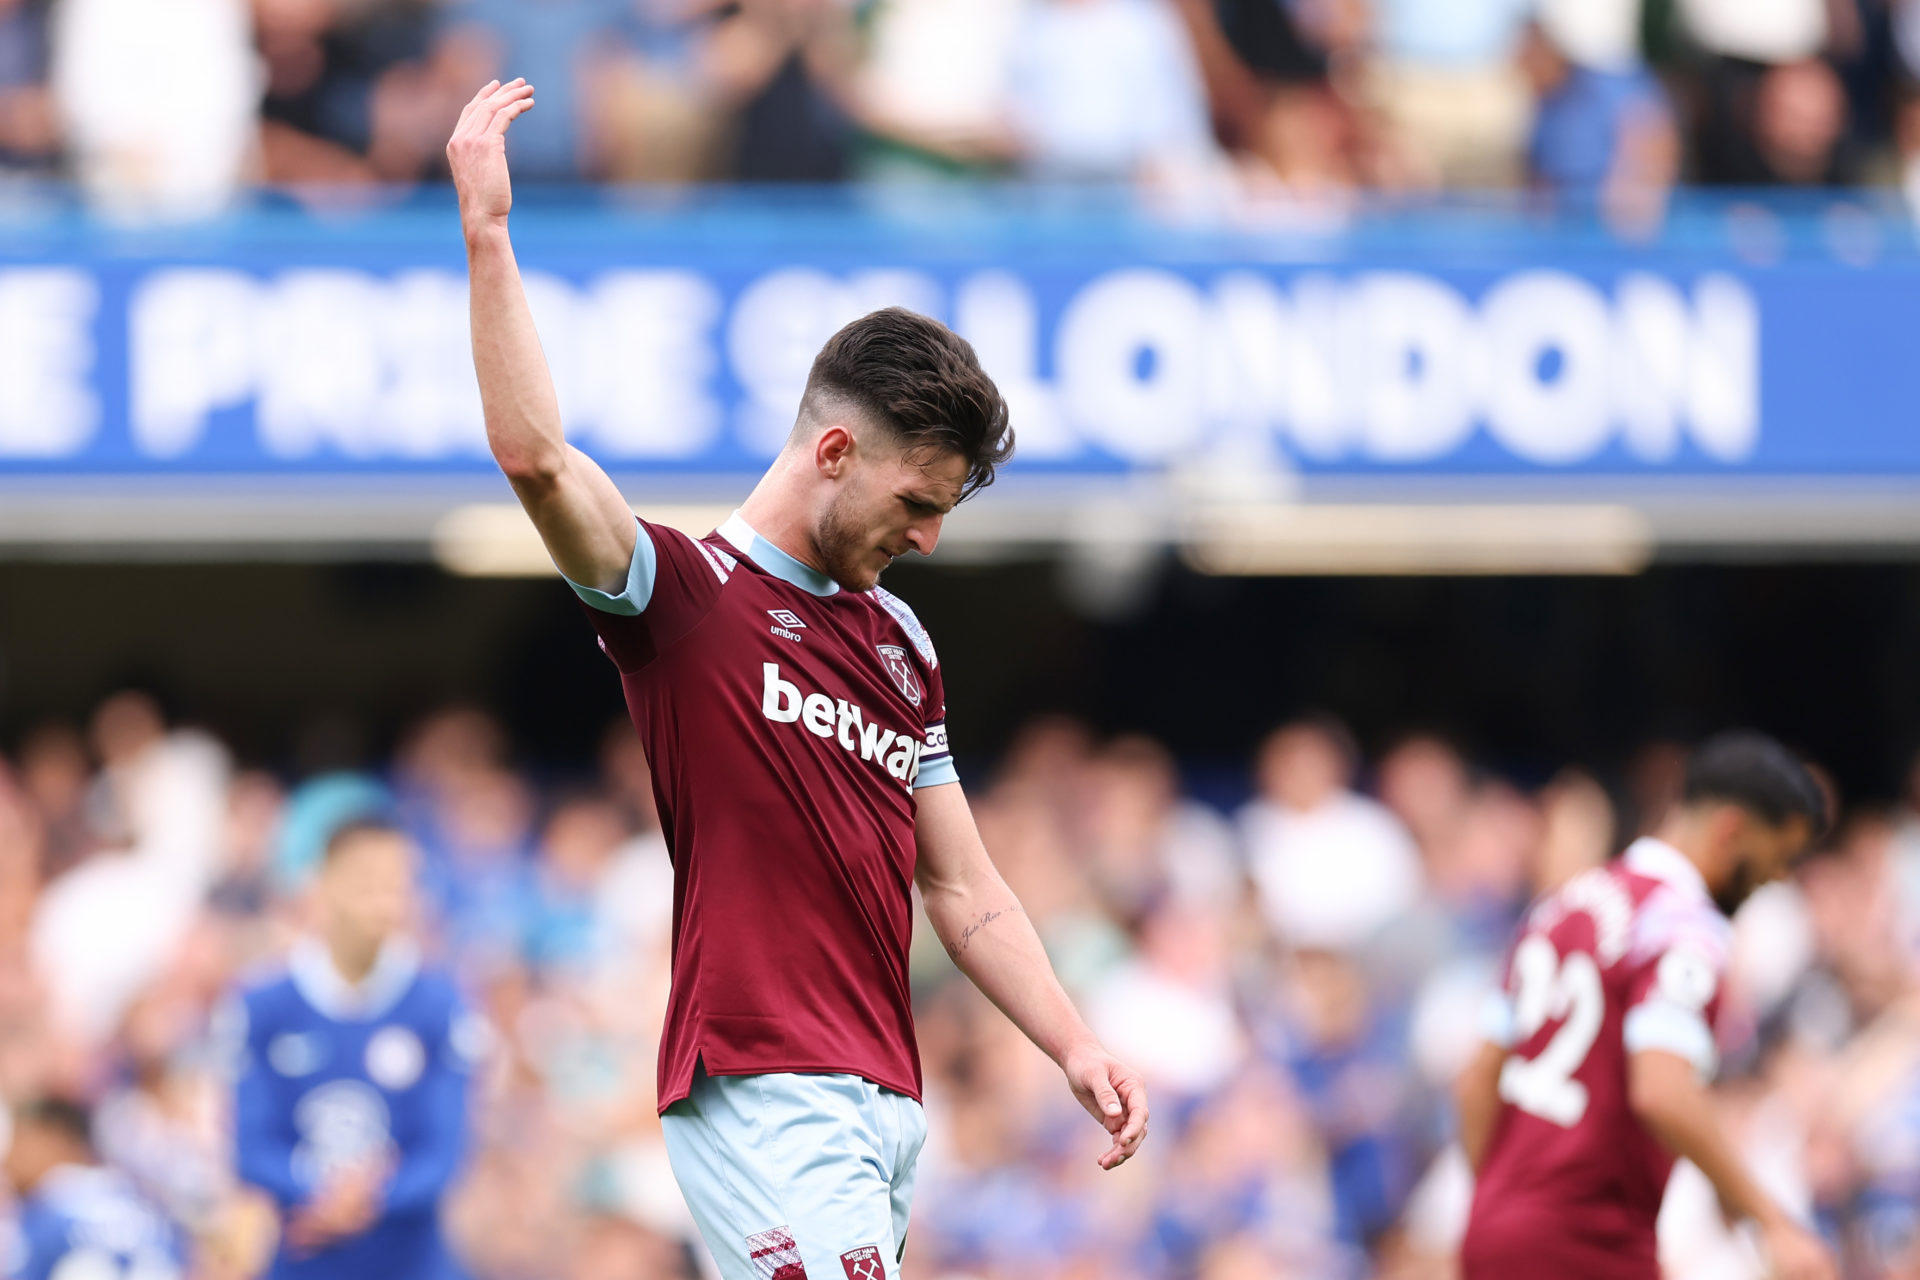 Rice’s comments on ‘immense’ ace prove how West Ham nearly made huge transfer mistake